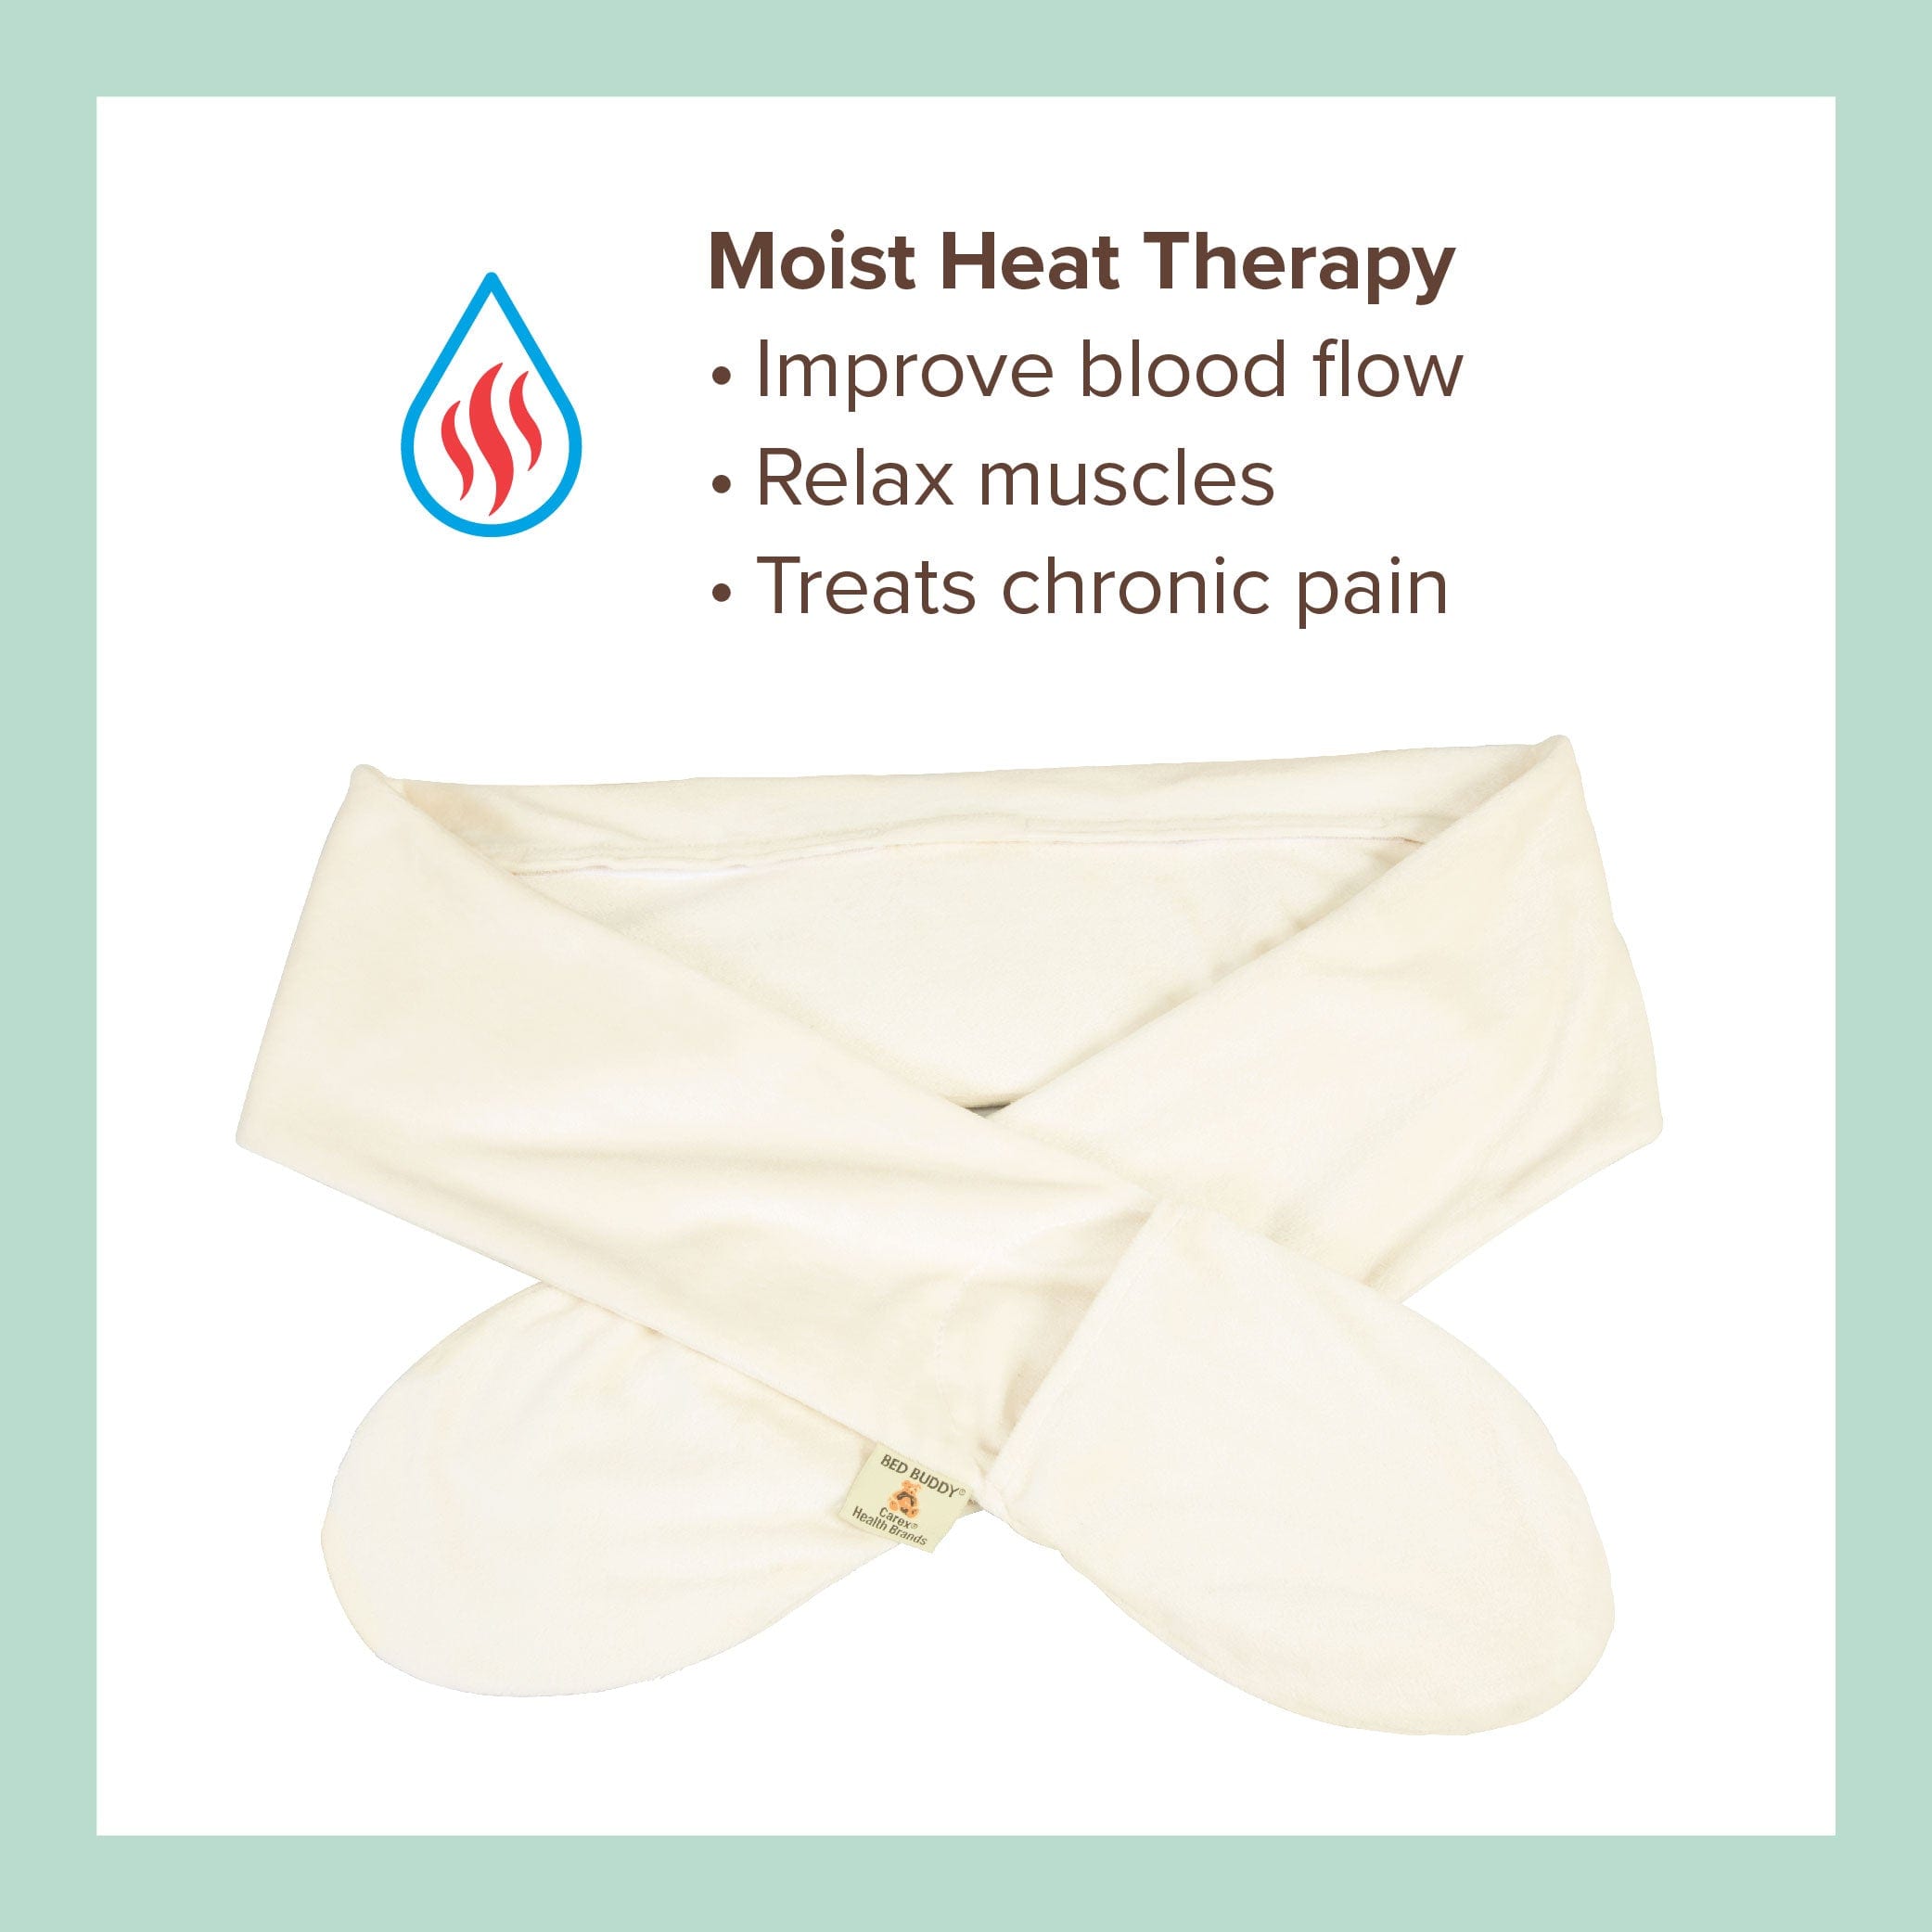 Bed Buddy Neck & Hand Wrap - Moist heat therapy to improve blood flow, relax muscles, and treat chronic pain